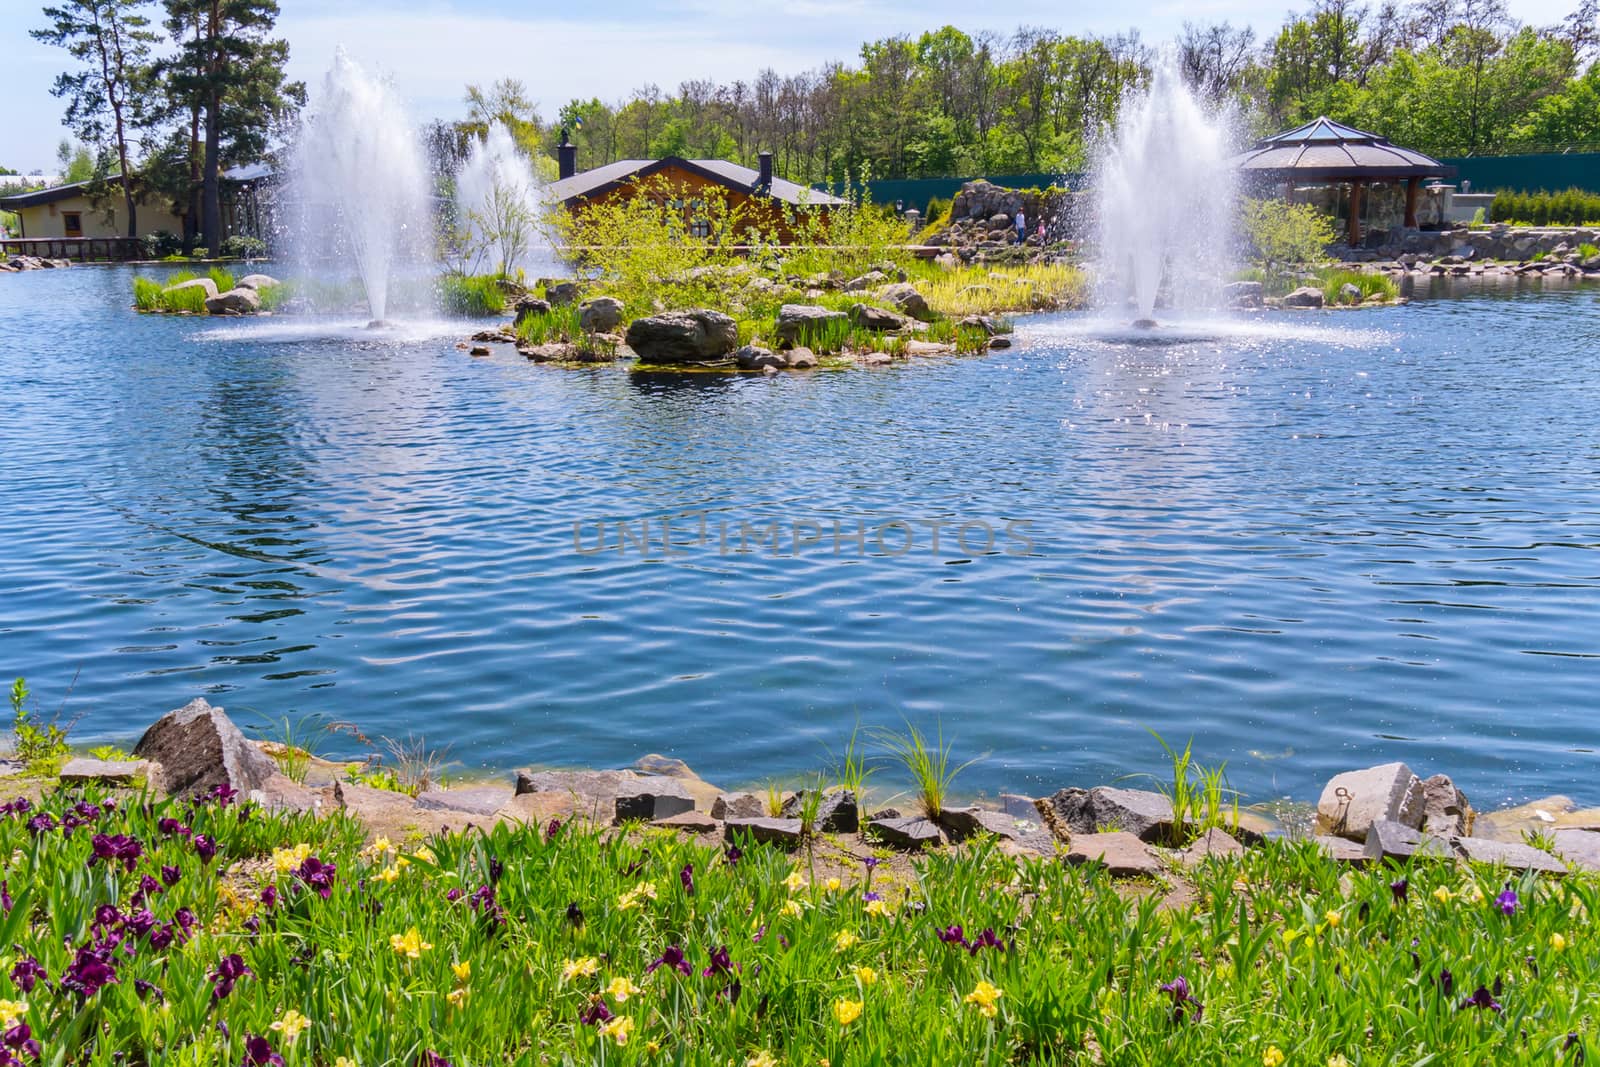 A cheerful landscape of a summer day with gentle bright colors growing on the bank of a pond in the park against the backdrop of fountains with clear water.